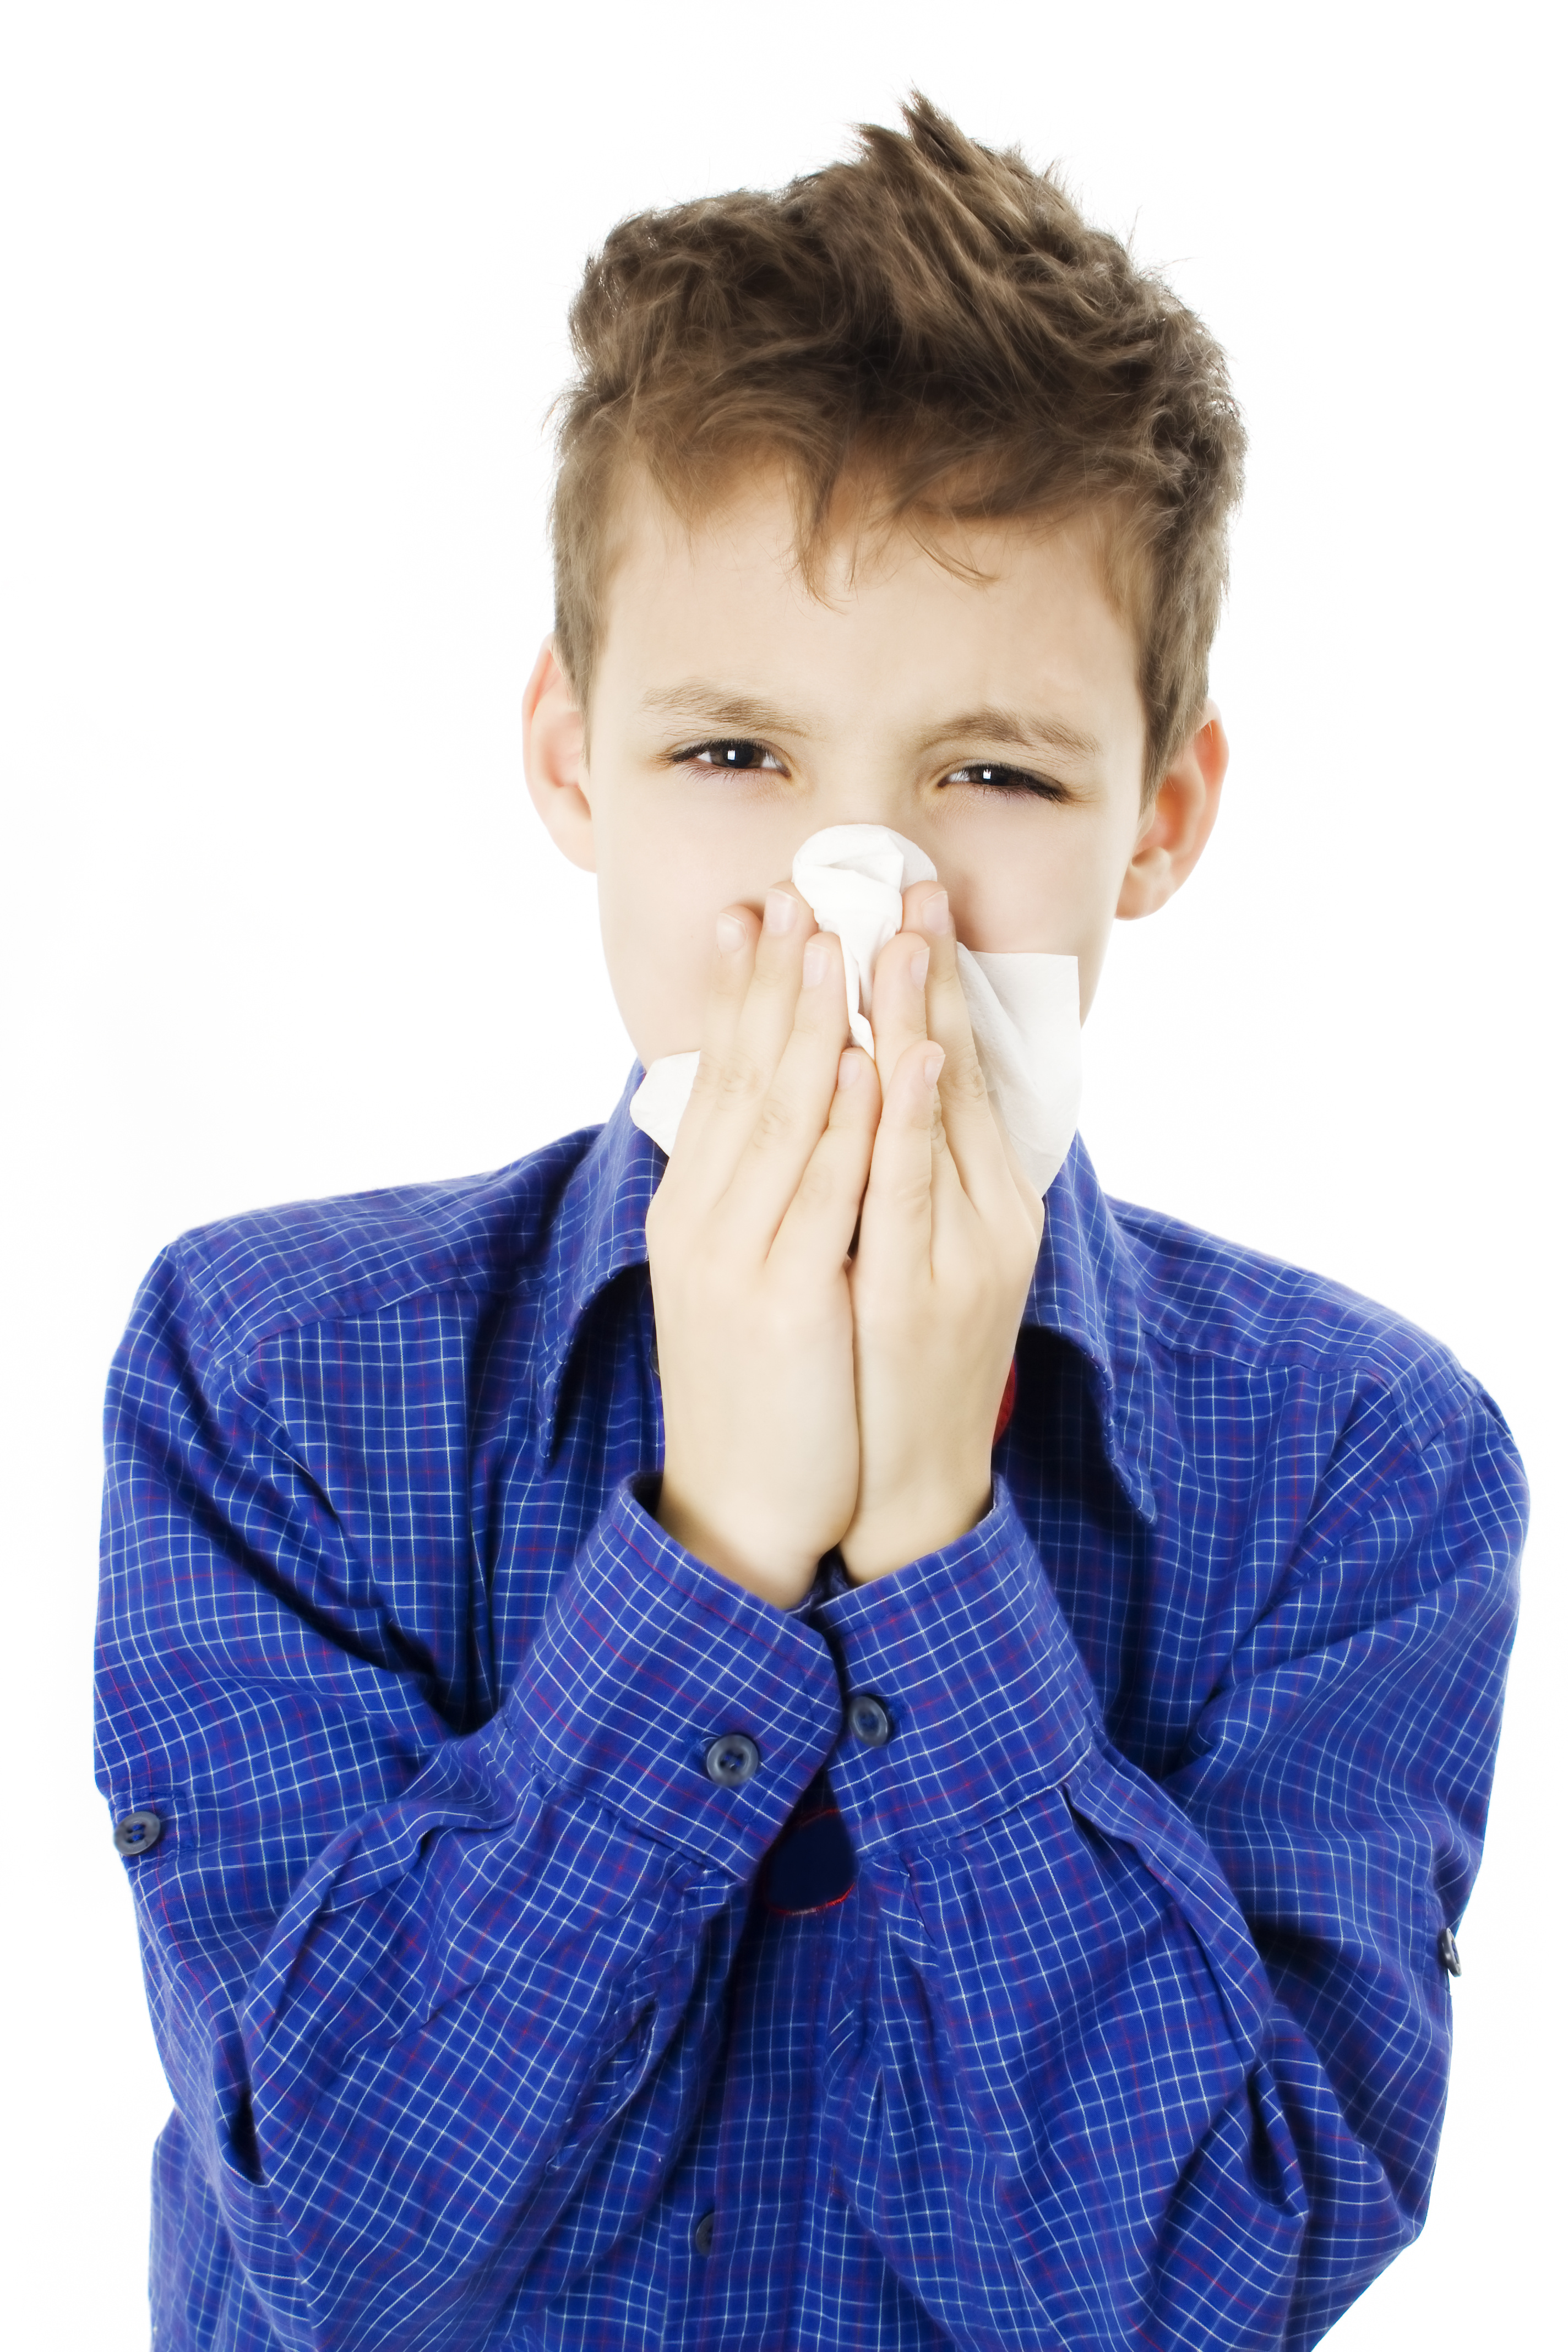 Some medicines commonly used are: - boy-cold-with-tissue